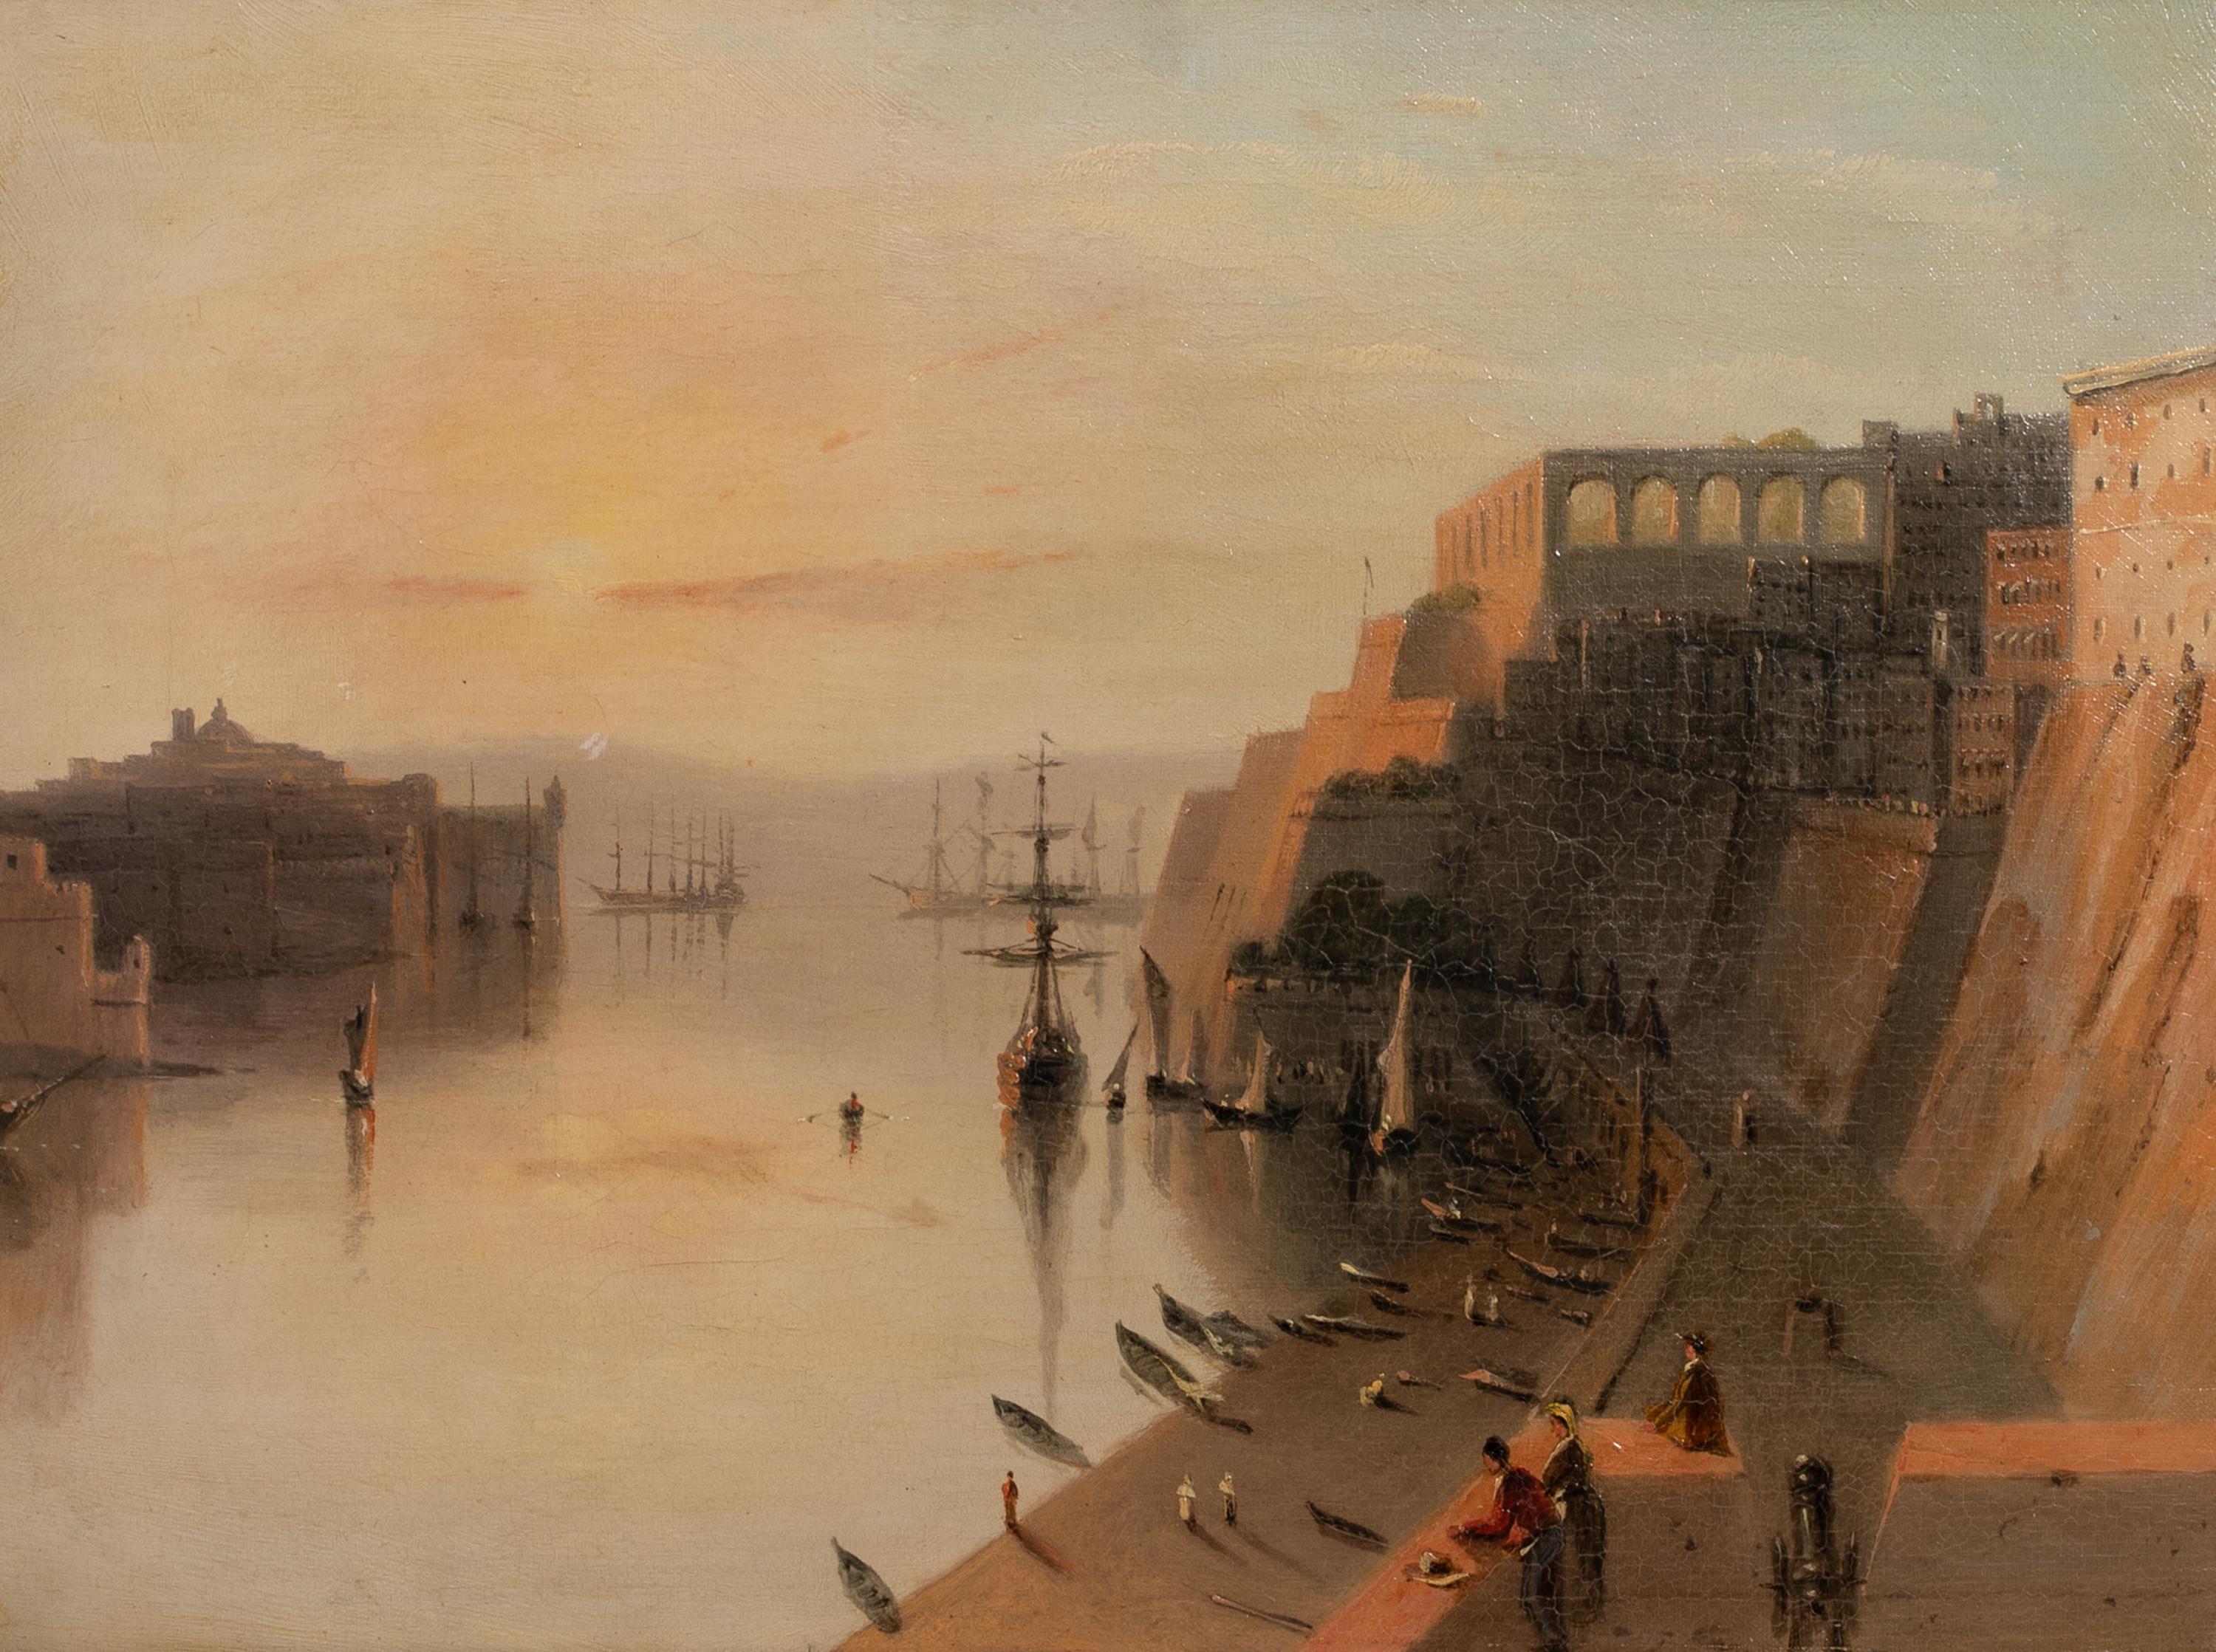 The Grand Harbour, Valetta, Malta, 19th Century

attributed William LINTON (1791-1876) to $20,000

Large 19th Century sunset view at the Grand Harbour, Valetta, Malta, oil on canvas attributed to William Linton. Excellent quality and condition circa